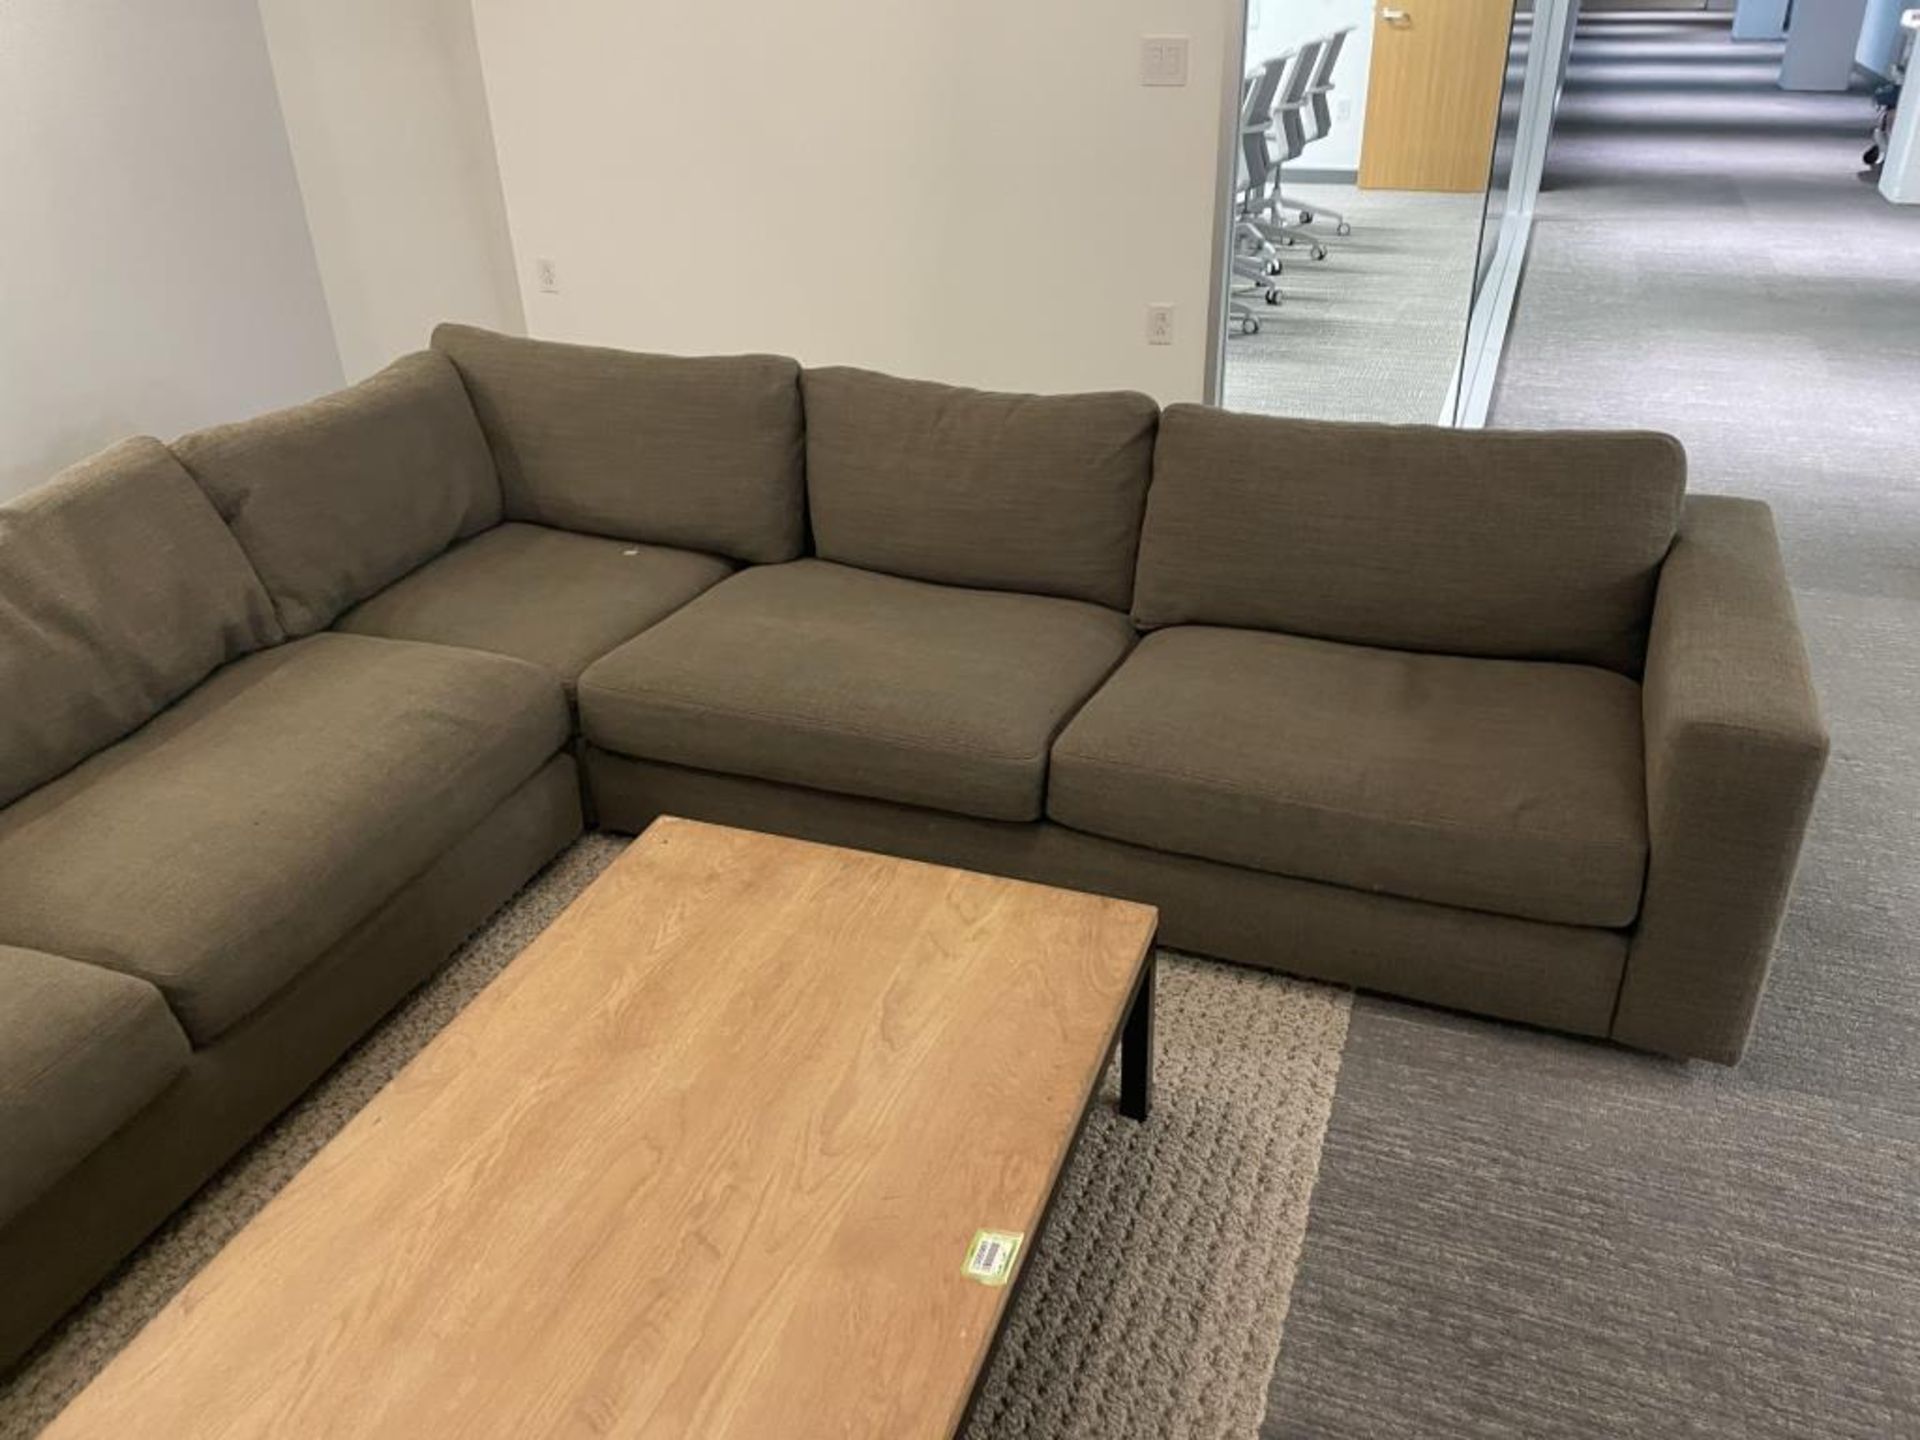 3-Sectional DWR L-Shape Couch w/ OHIO Coffee Table - Image 3 of 6